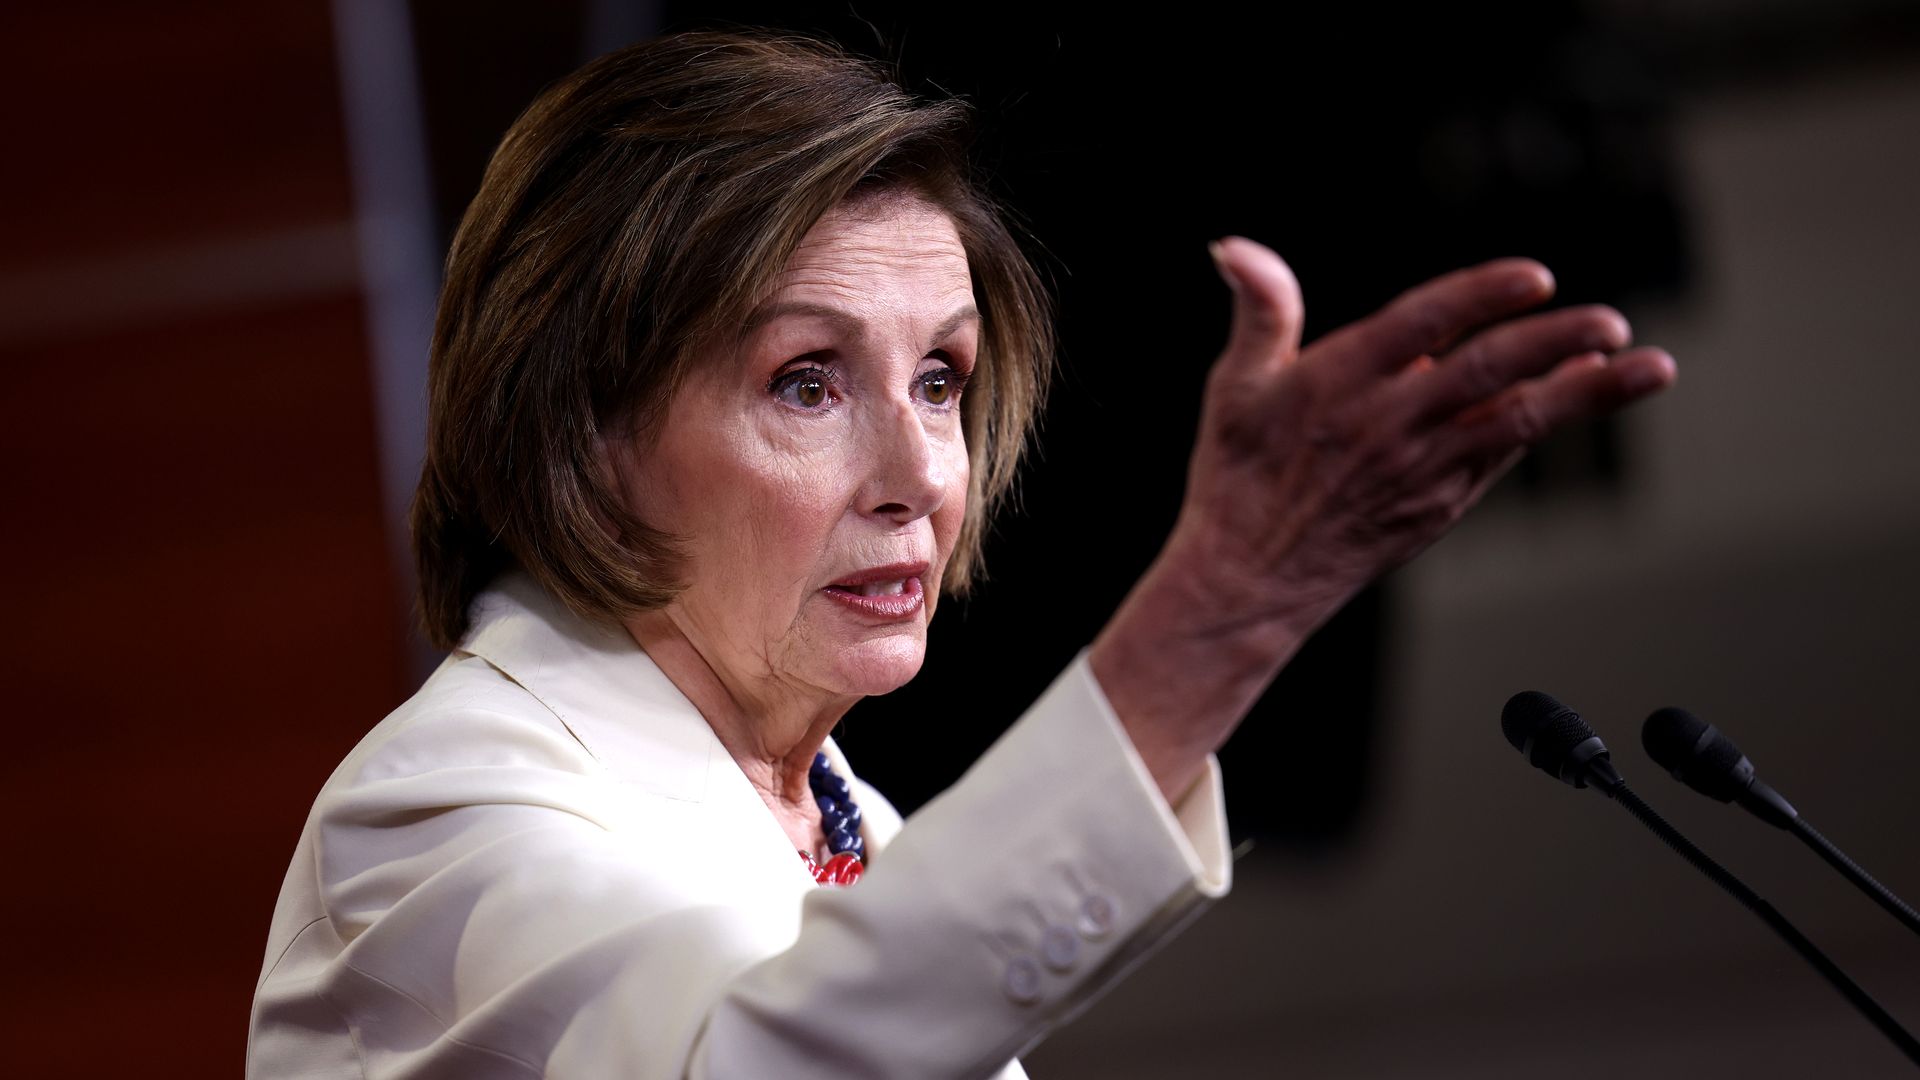 Photo of Nancy Pelosi wearing a white suit and gesturing while speaking